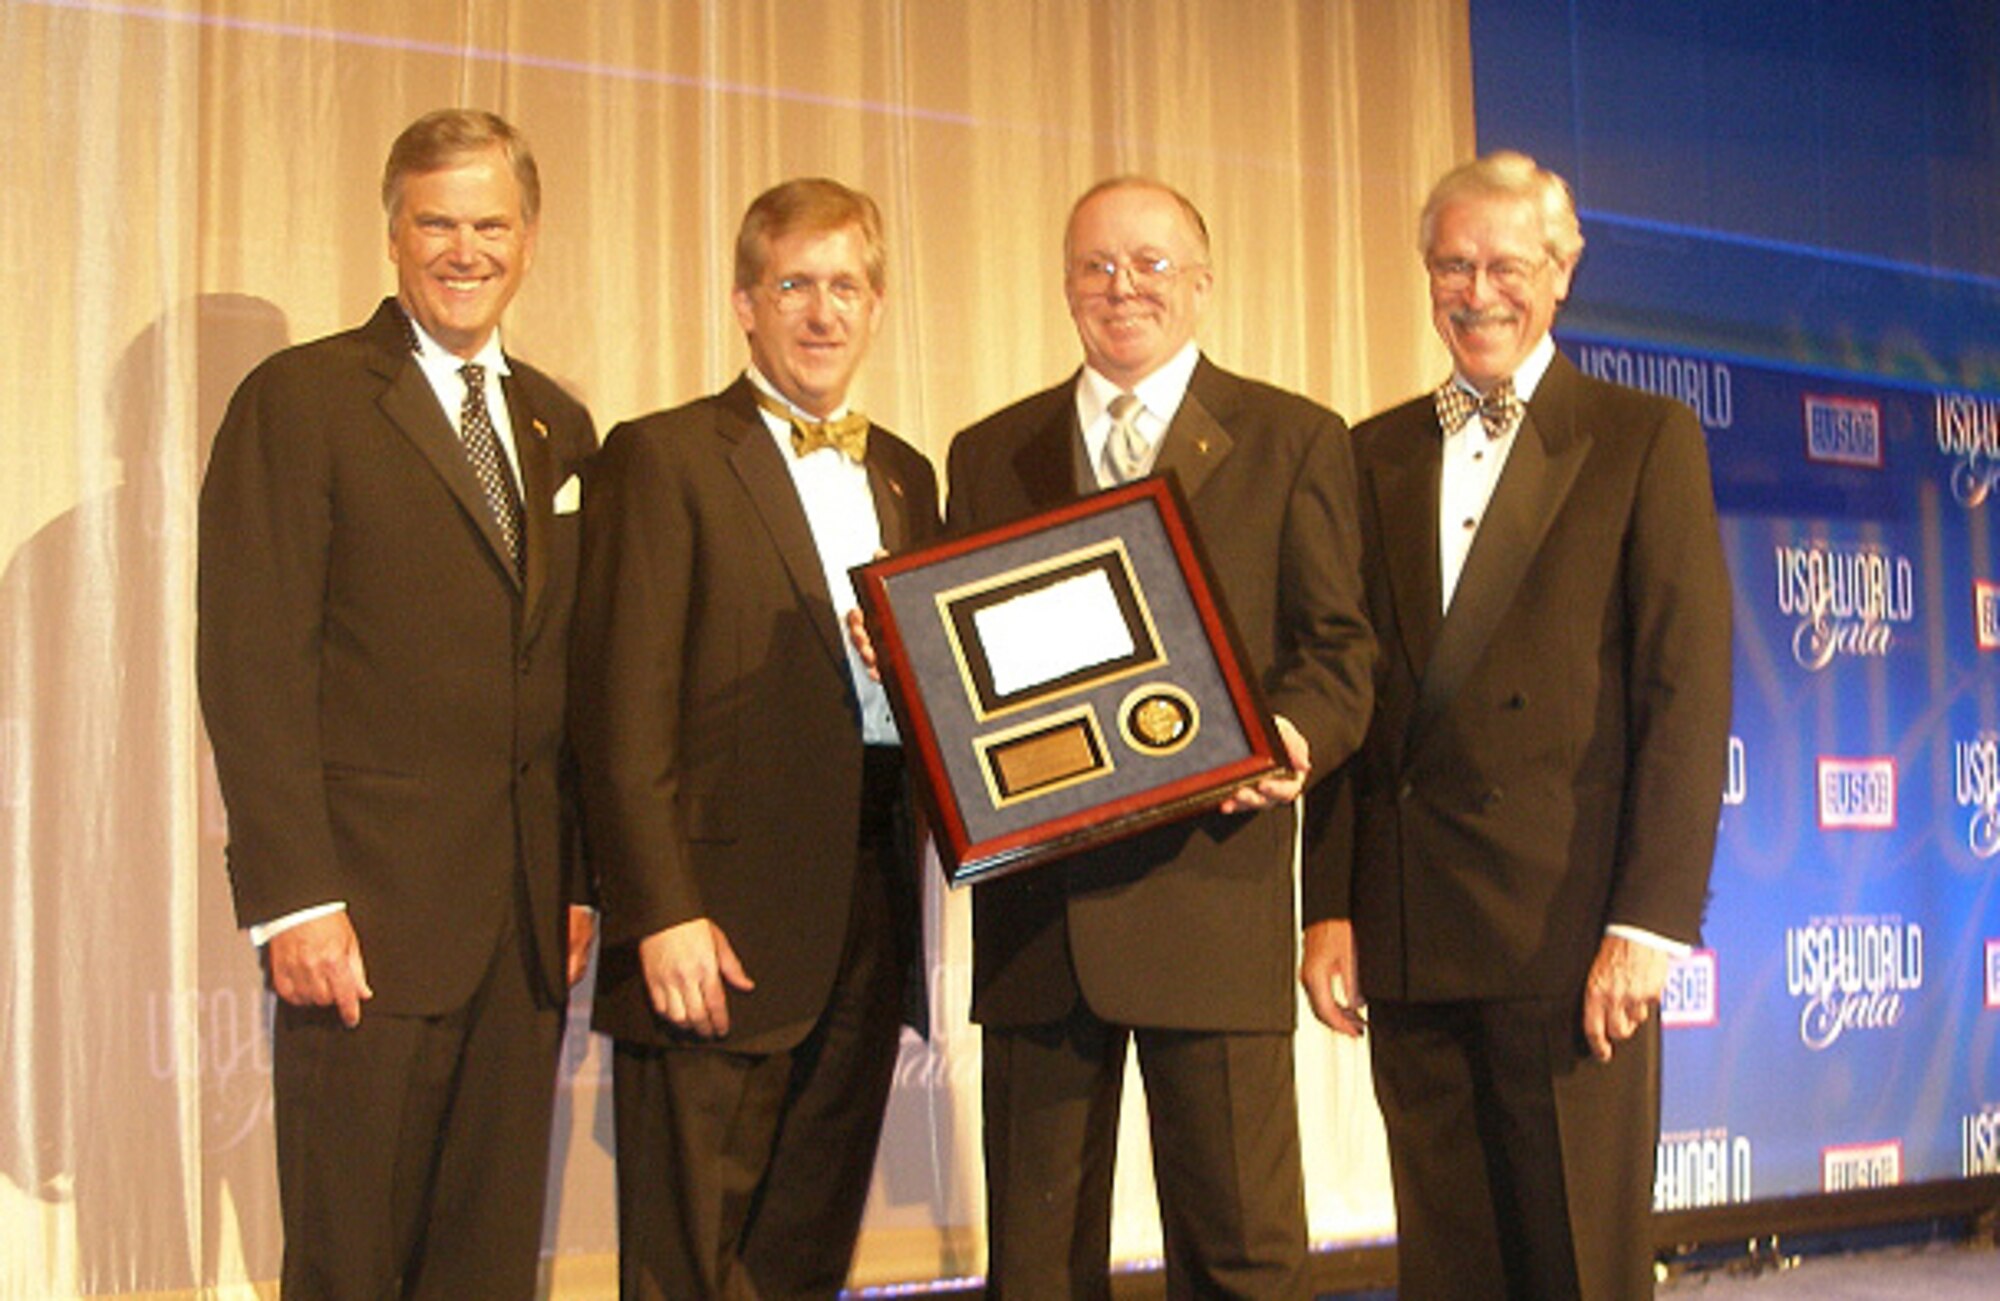 (Left to right) Edward Powell, Jr., United Services Organization World Headquarters president, Dave McIntyre, TriWest Health Care Alliance president, Dave Wilson, 2007 USO Volunteer of the Year Award winner, and William Moll, USO World Board of Governers chairman, meet at the USO World Gala in Washington, D.C., Sept. 21. Mr. Wilson was presented the award at the event. (Courtesy photo)